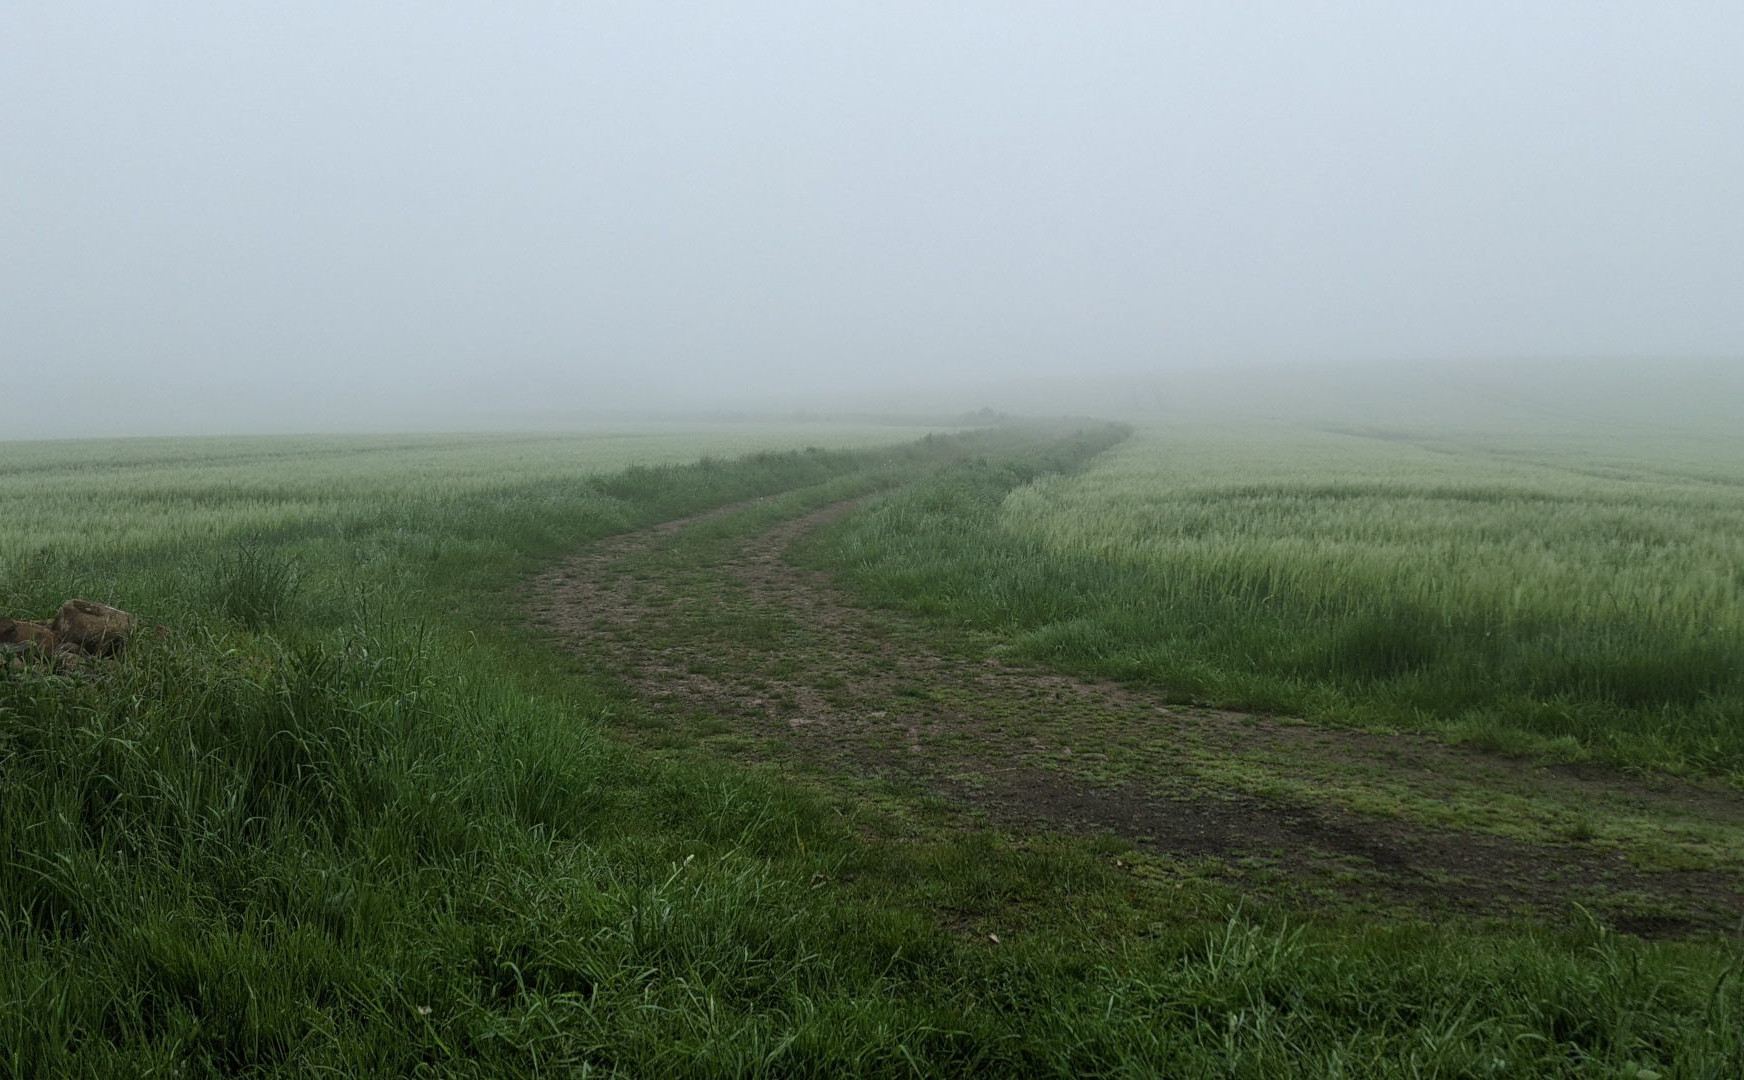 A curved track between two fields. The landscape is almost completely obscured by fog.